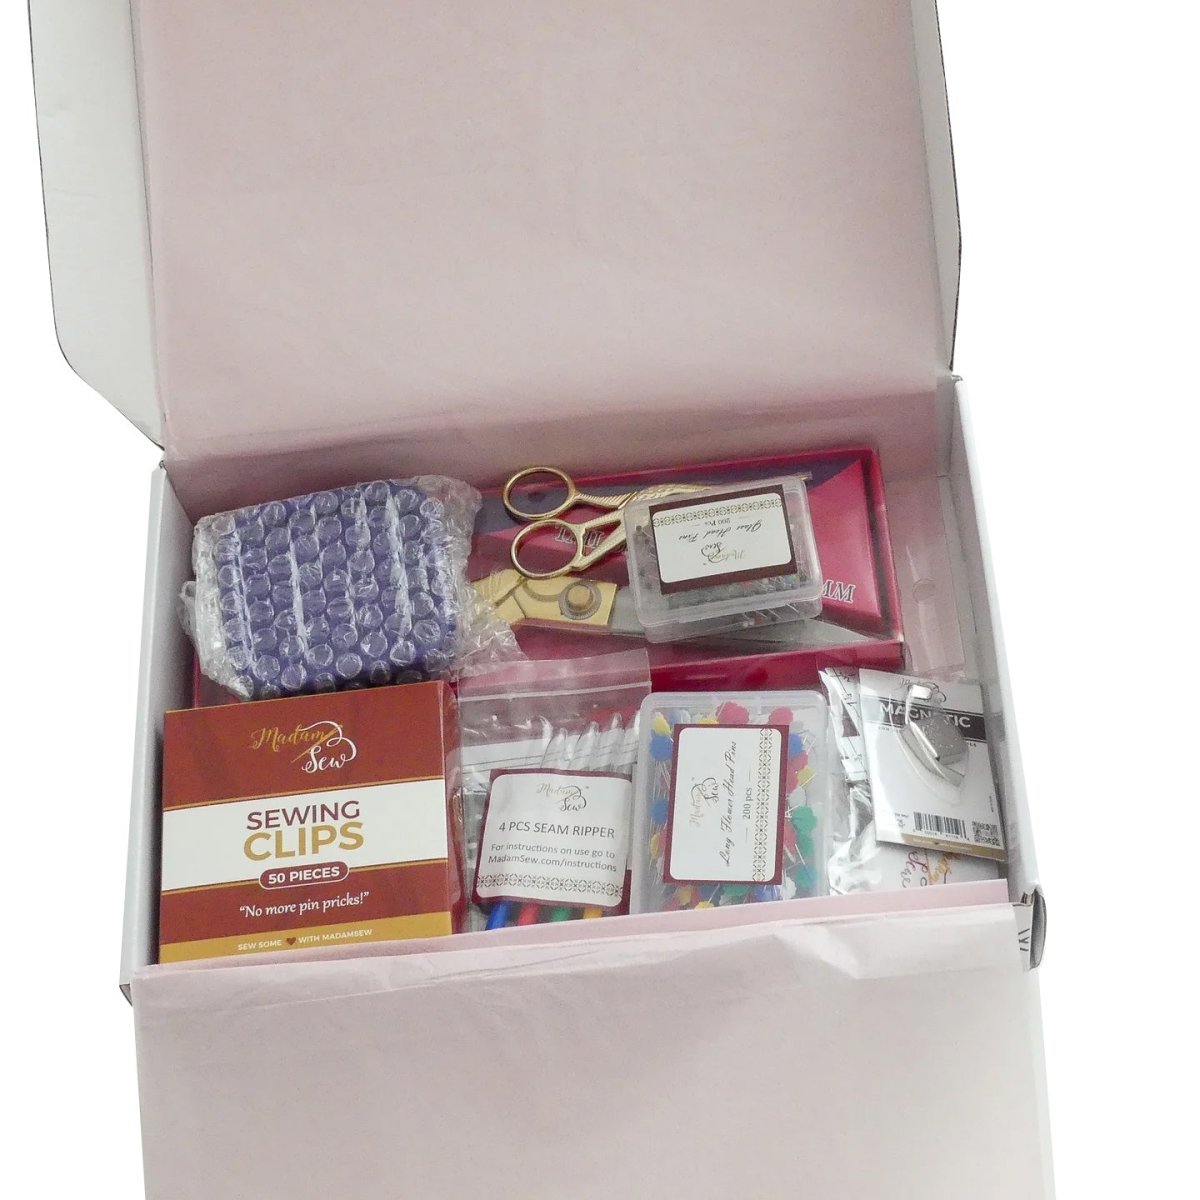 An open box showing the contents of the start with sewing essentials box